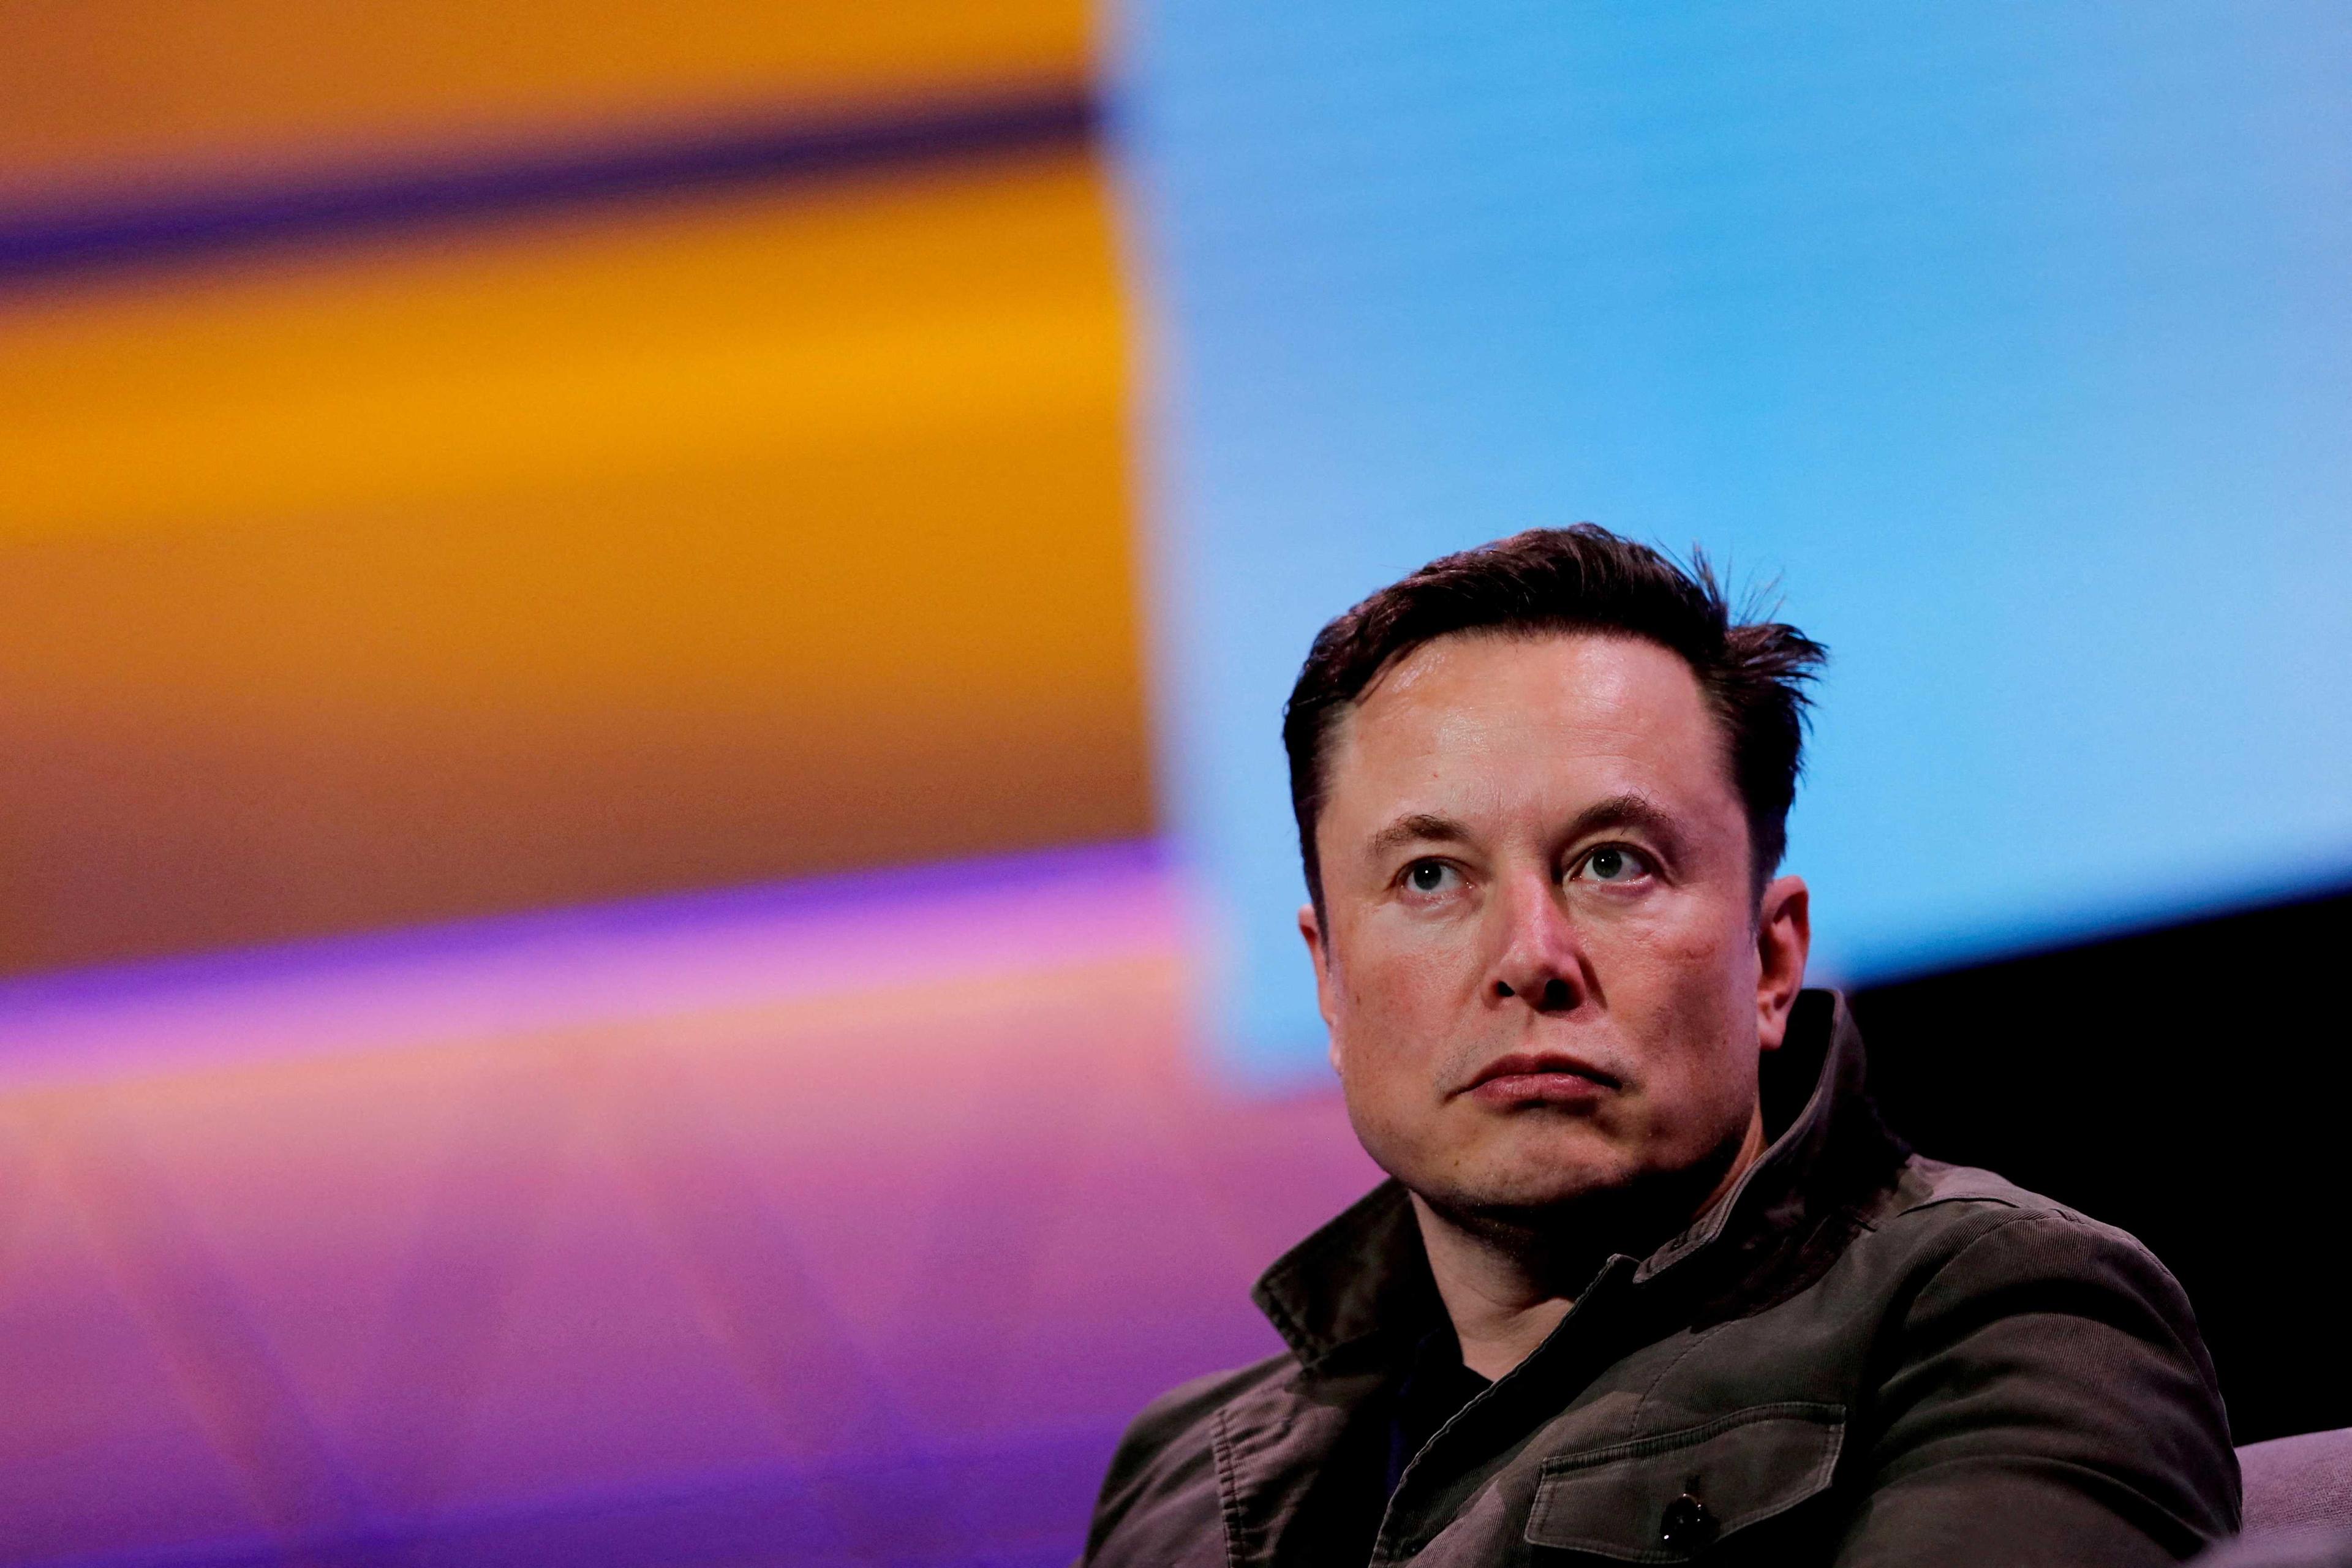 Elon Musk speaks during a conversation at the E3 gaming convention in Los Angeles, California, US, June 13, 2019. Photo: Reuters